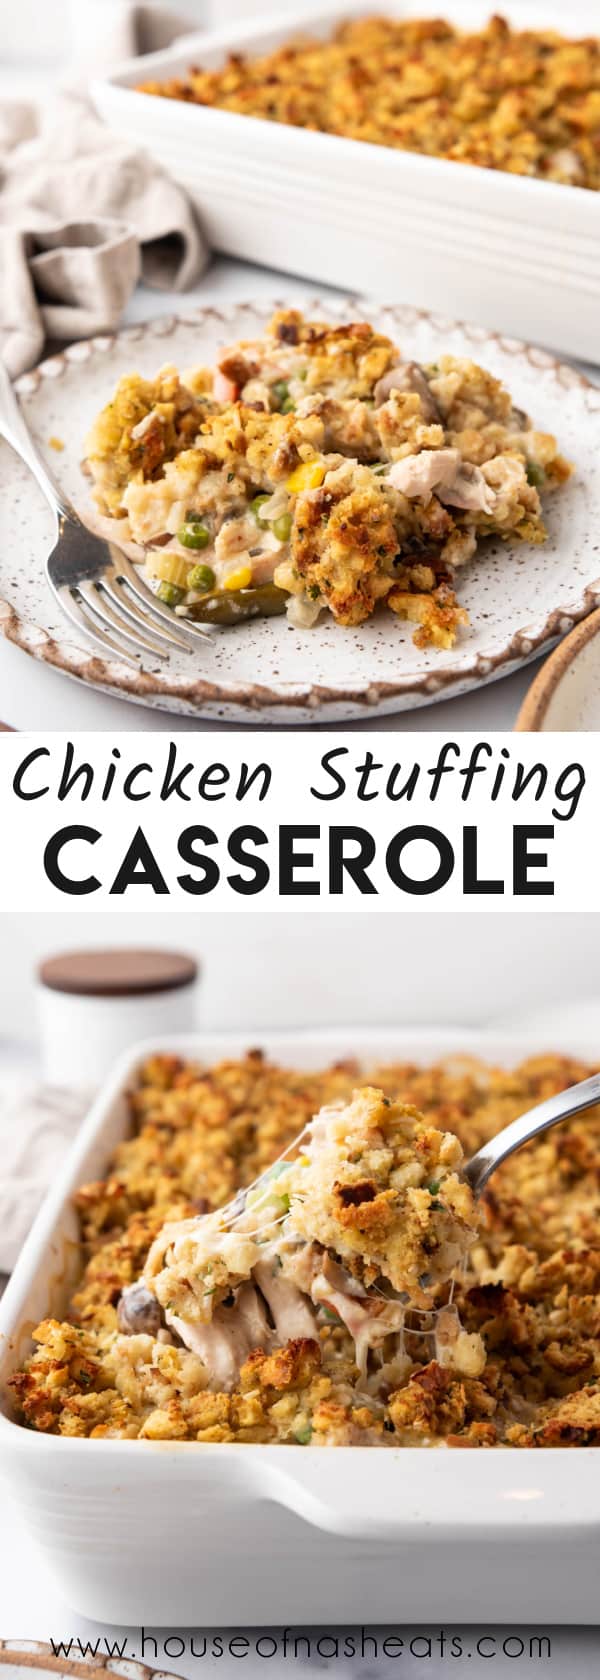 A collage of images of chicken and stuffing casserole with text overlay.